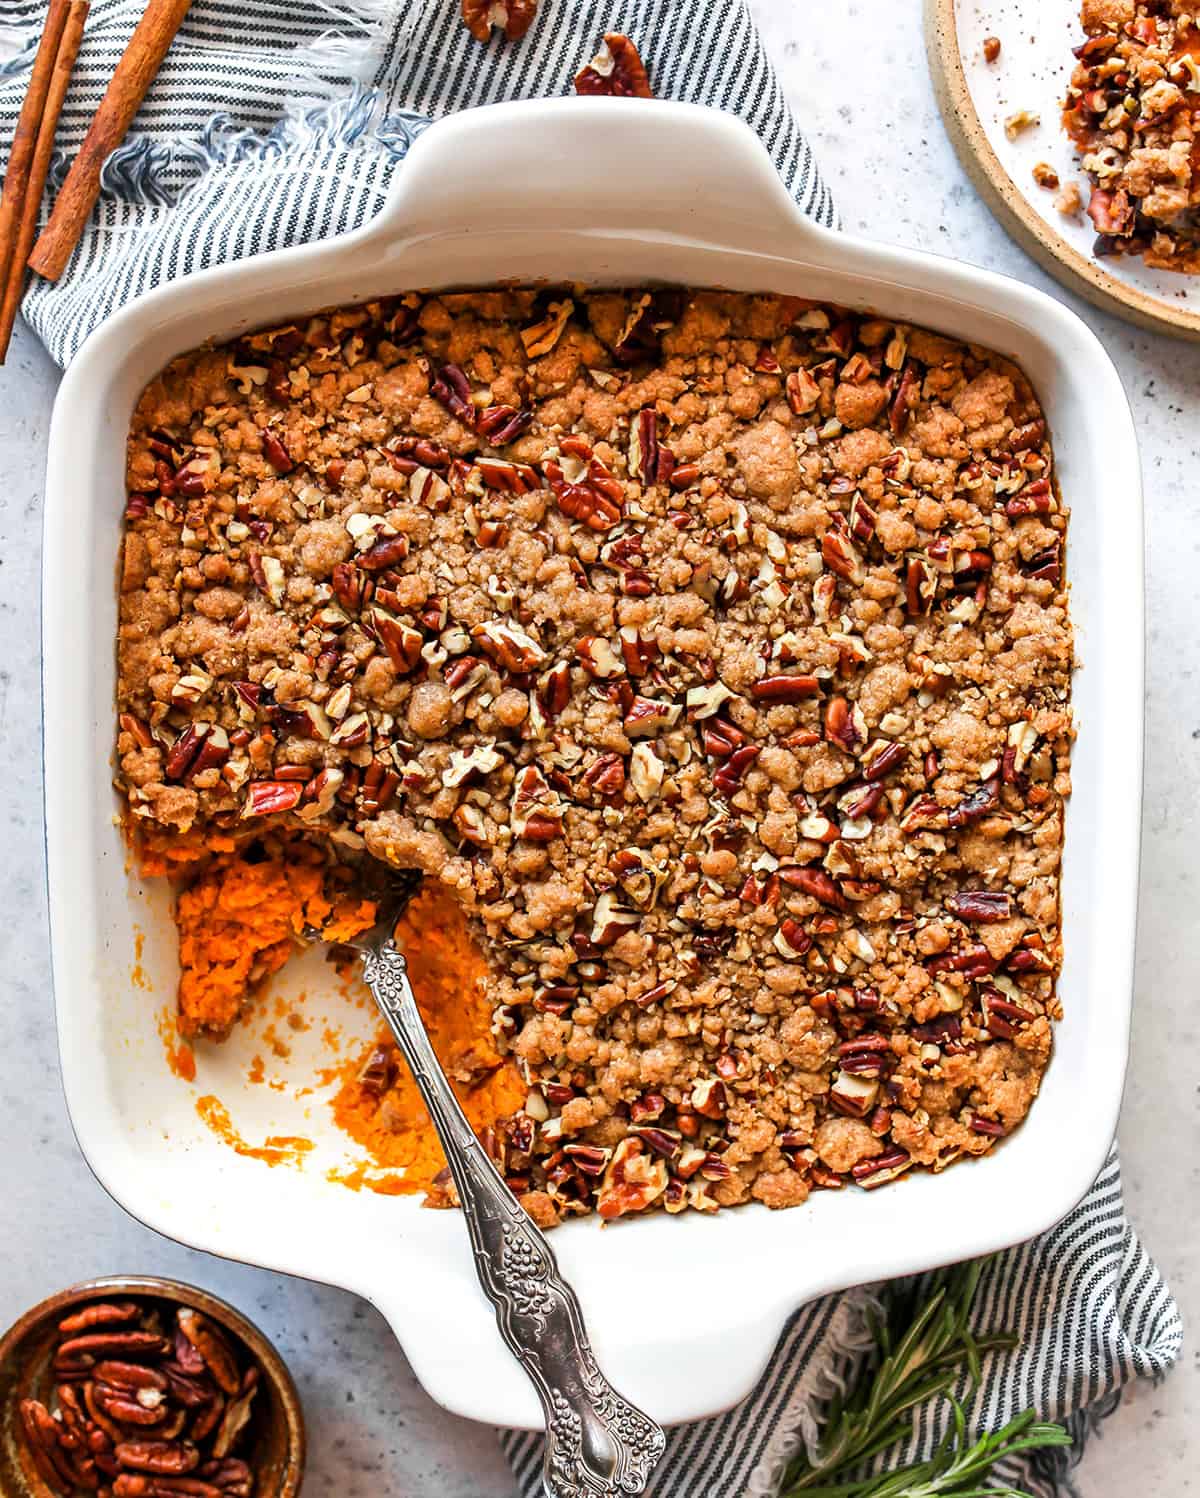 Overhead view of sweet potato casserole in a baking dish